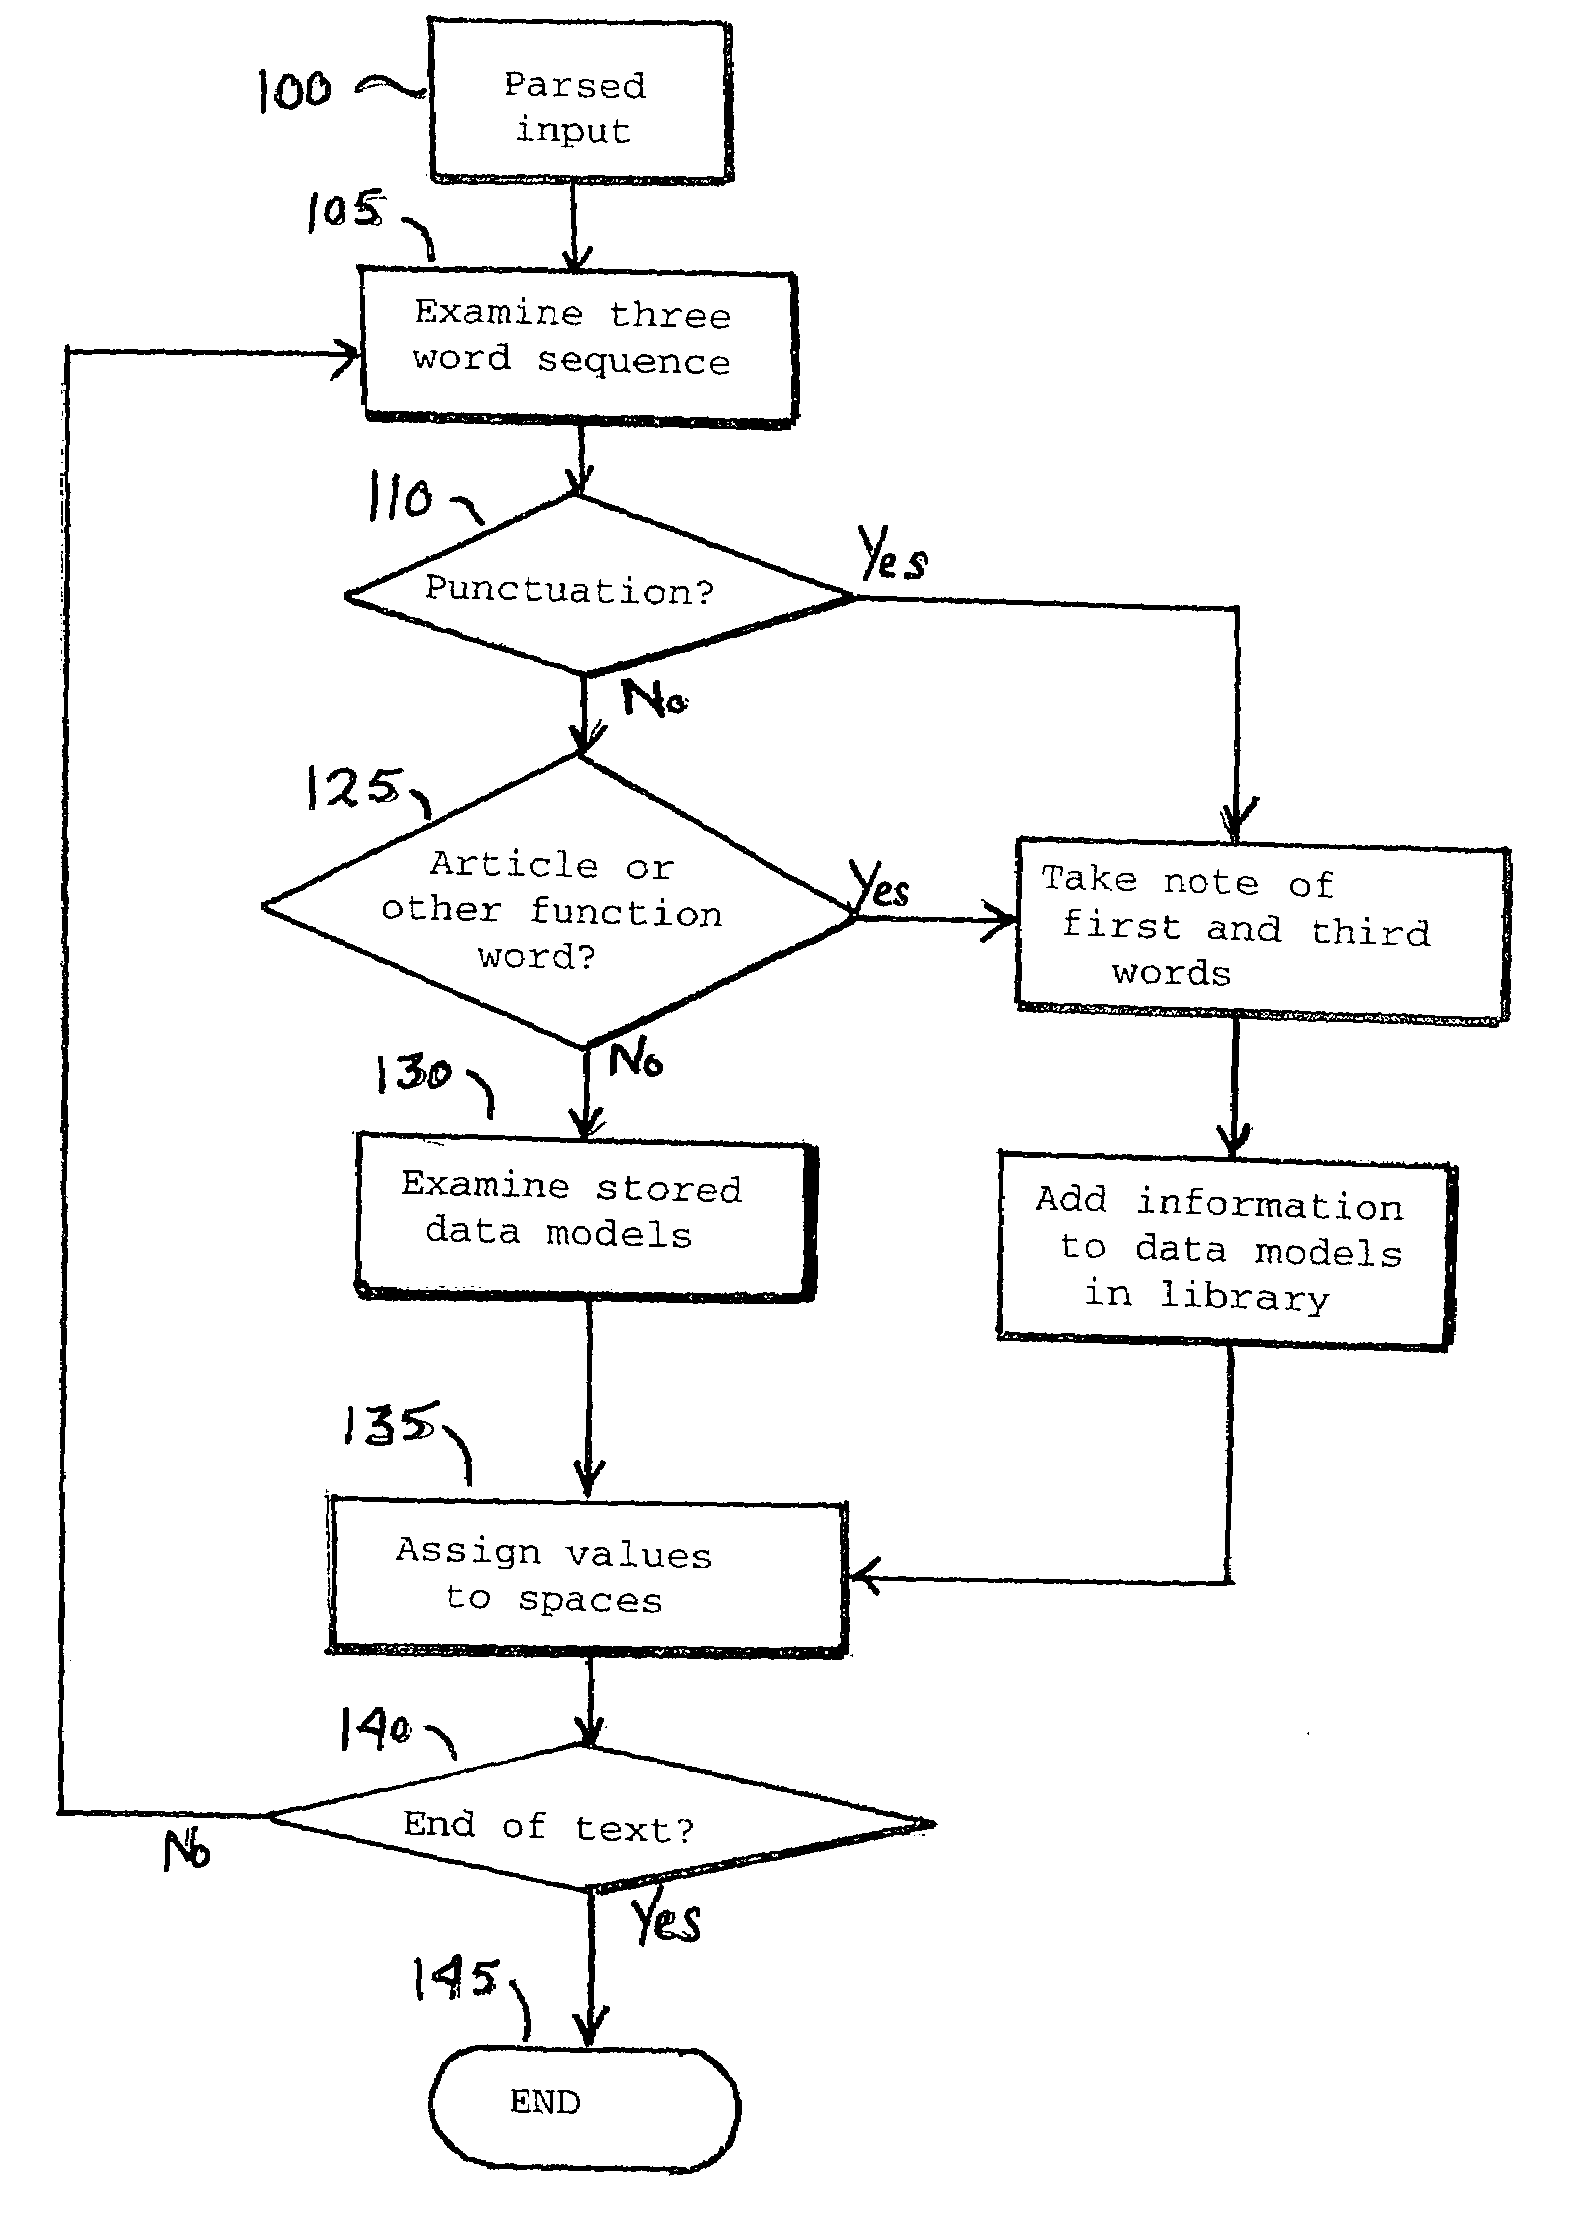 System and method for formatting text according to linguistic, visual and psychological variables